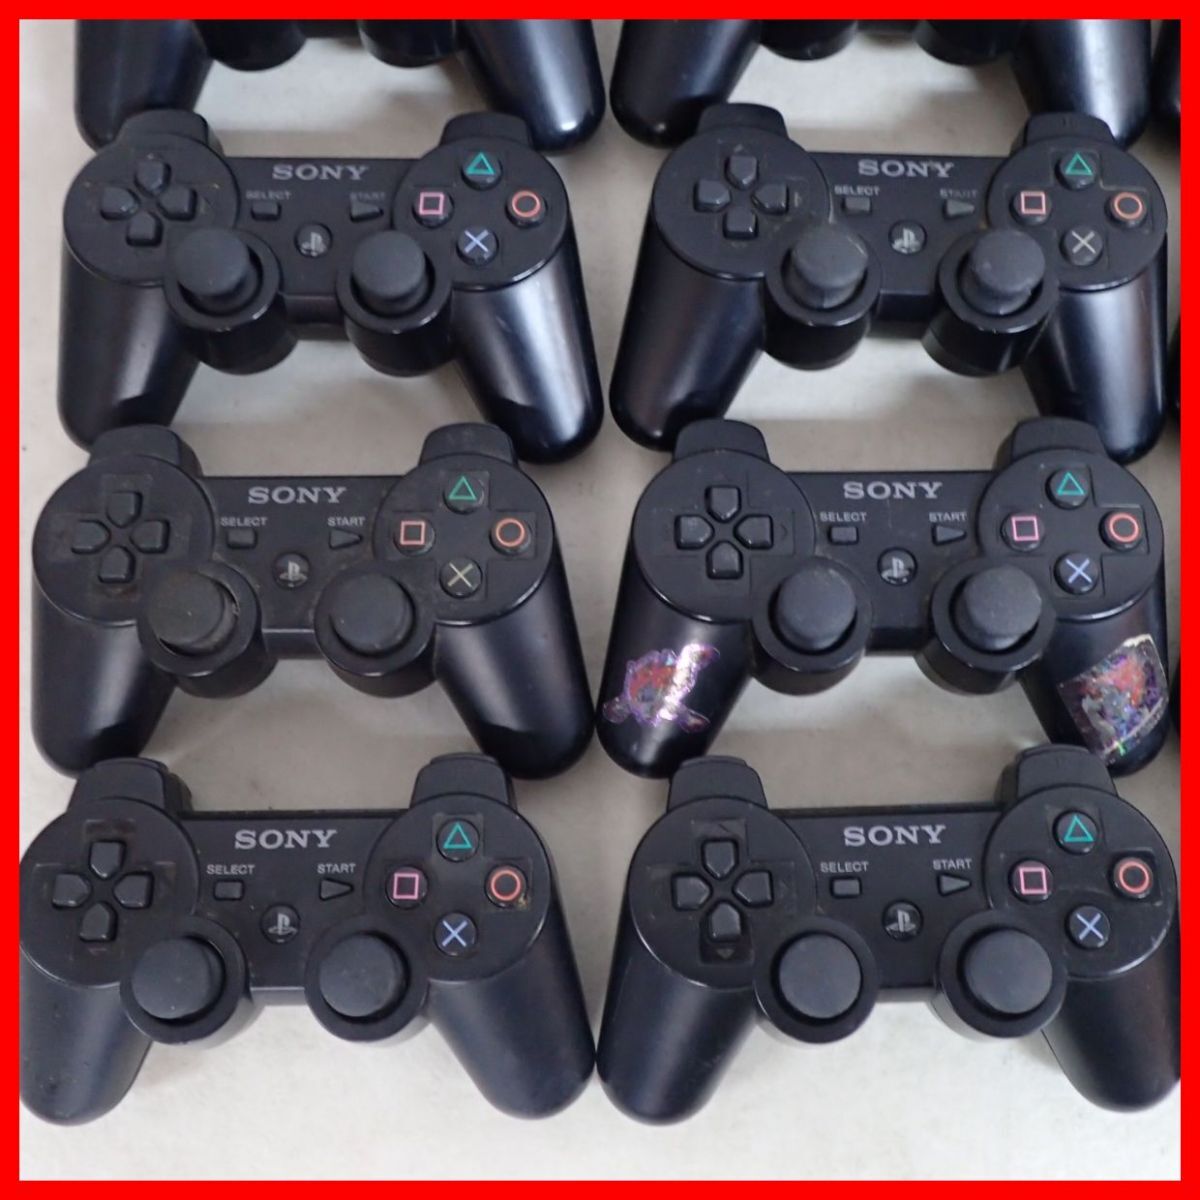 PS3 PlayStation 3 wireless controller dual shock 3 together 20 piece large amount set [20